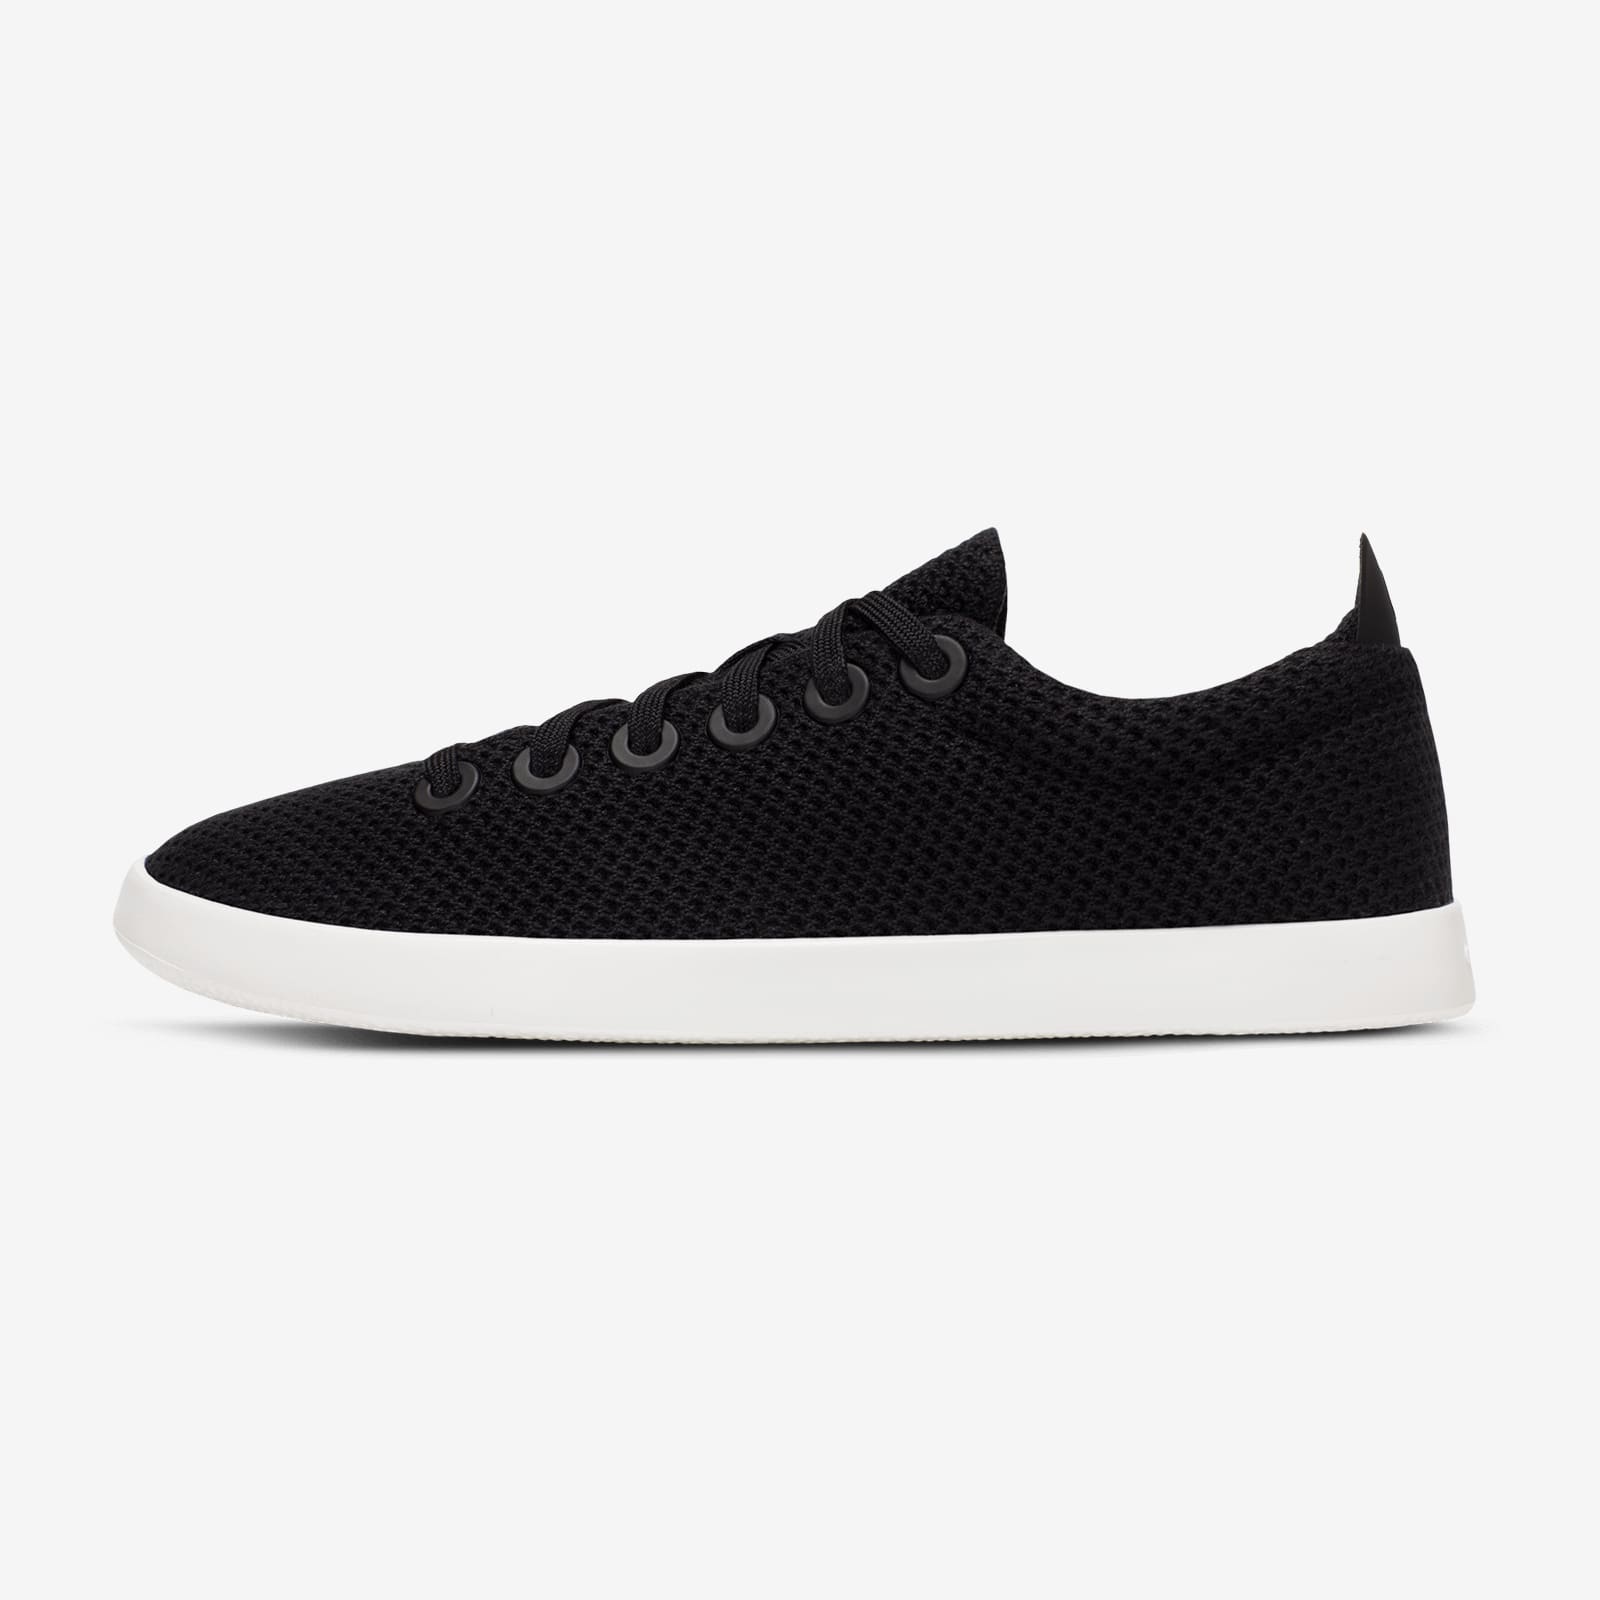 Tree Pipers for Men | Everyday Sneakers | Allbirds